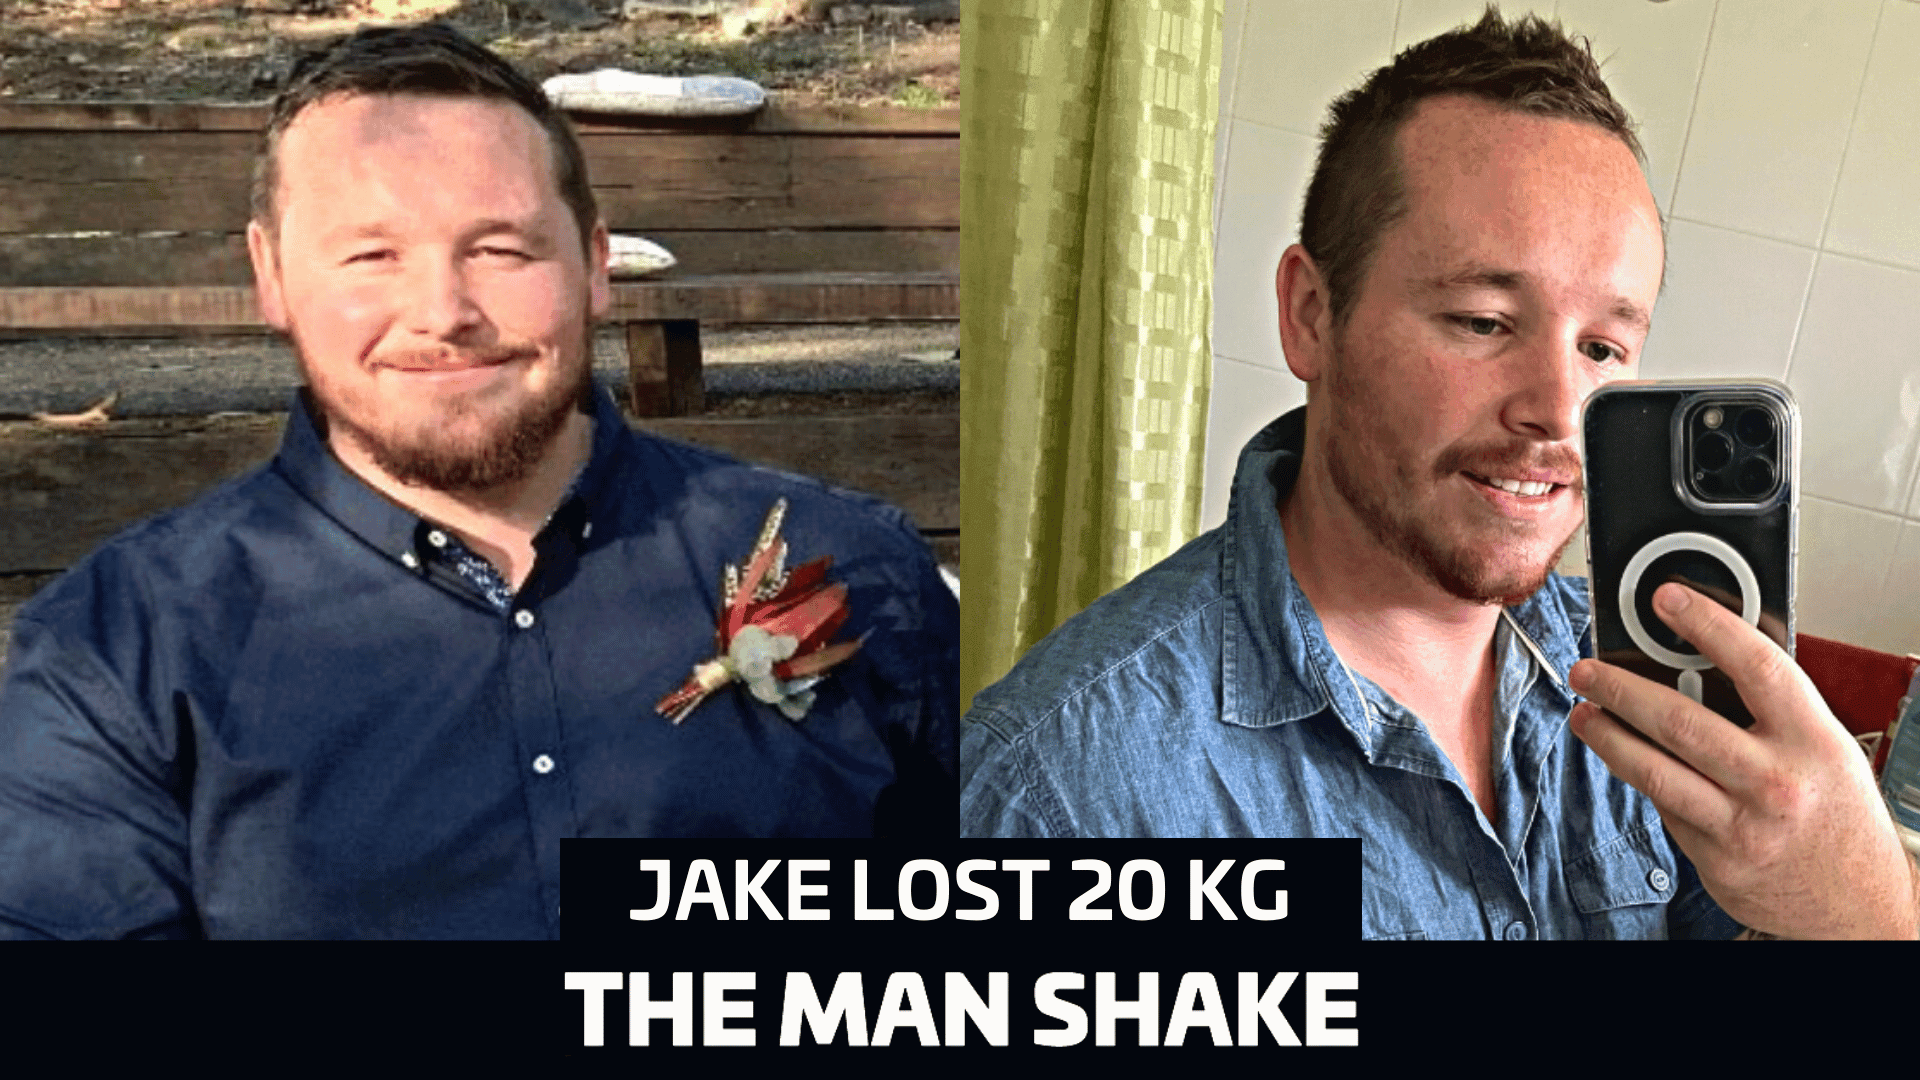 Jake lost 20kg and is not looking back.